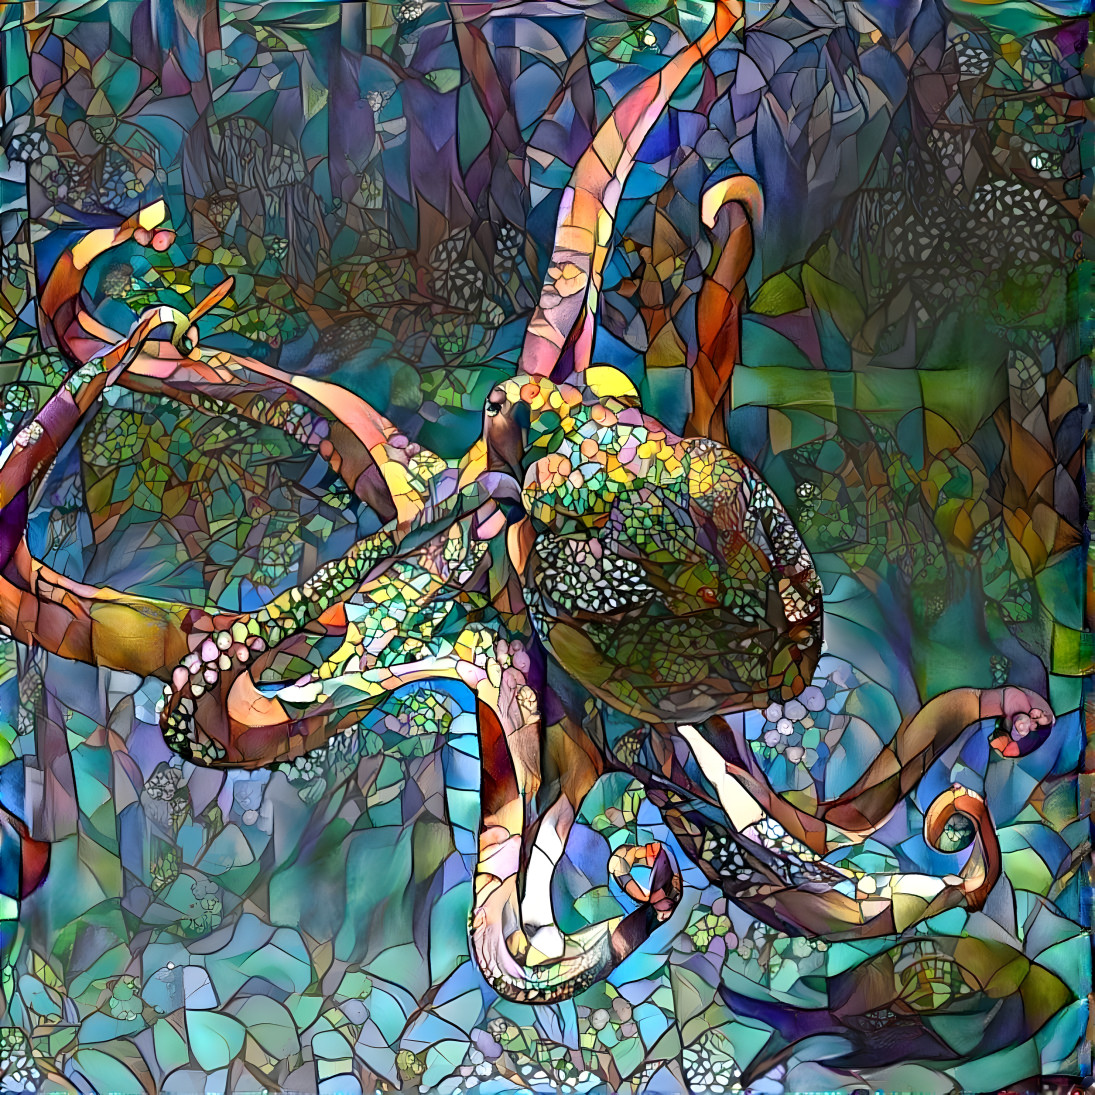 The octopus #2